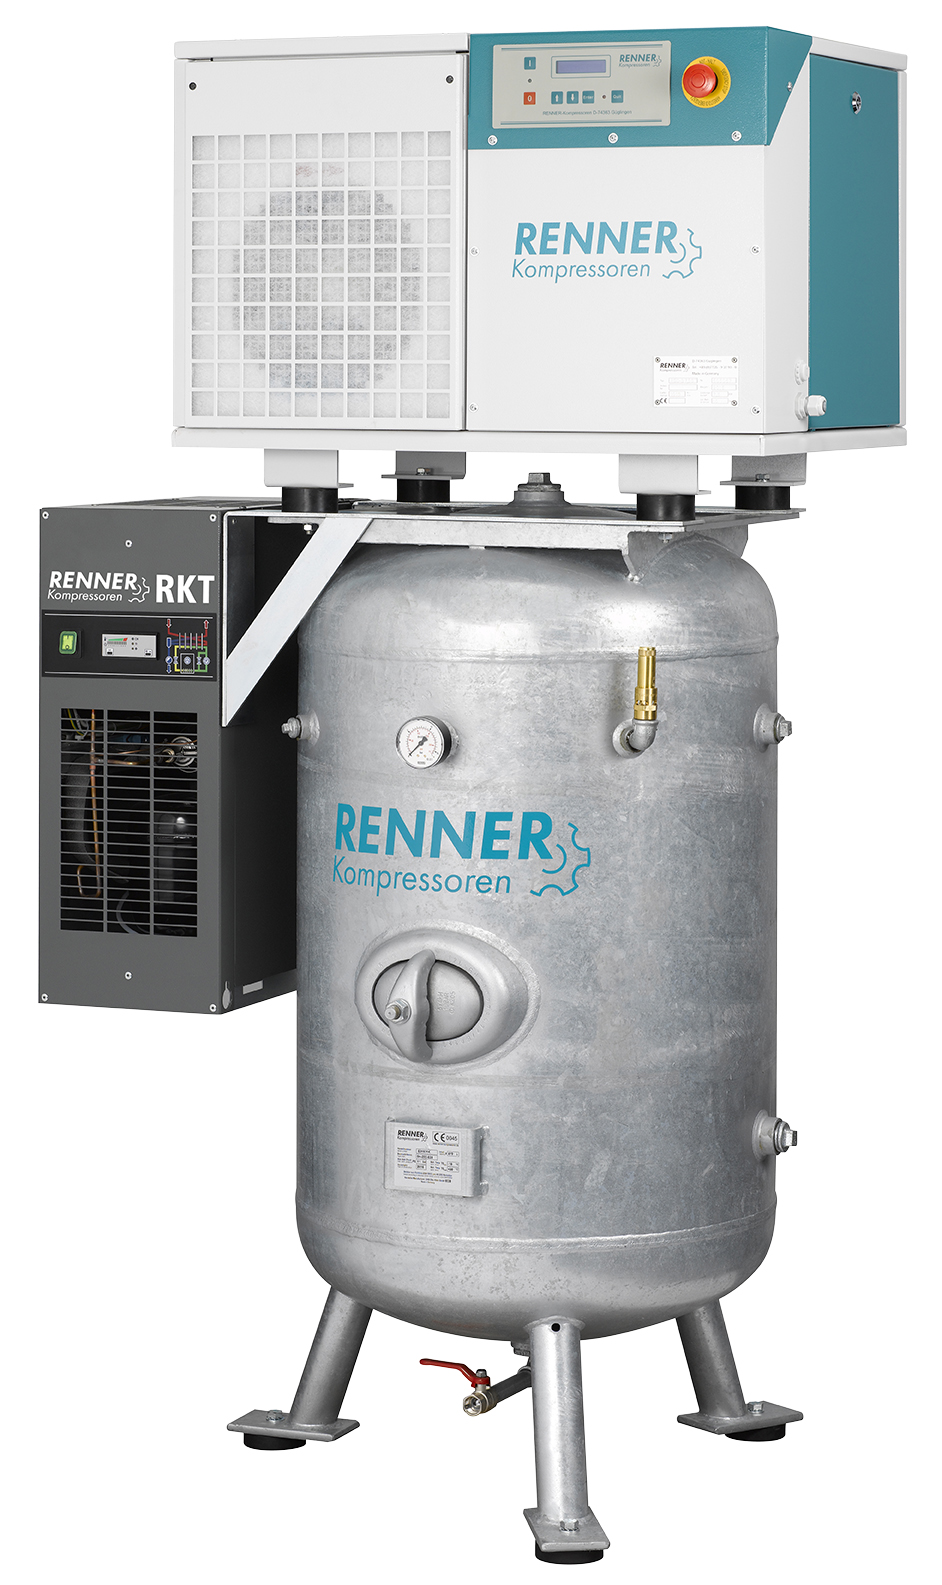 Reference Pumps and Compressors RENNER by KTR Systems GmbH